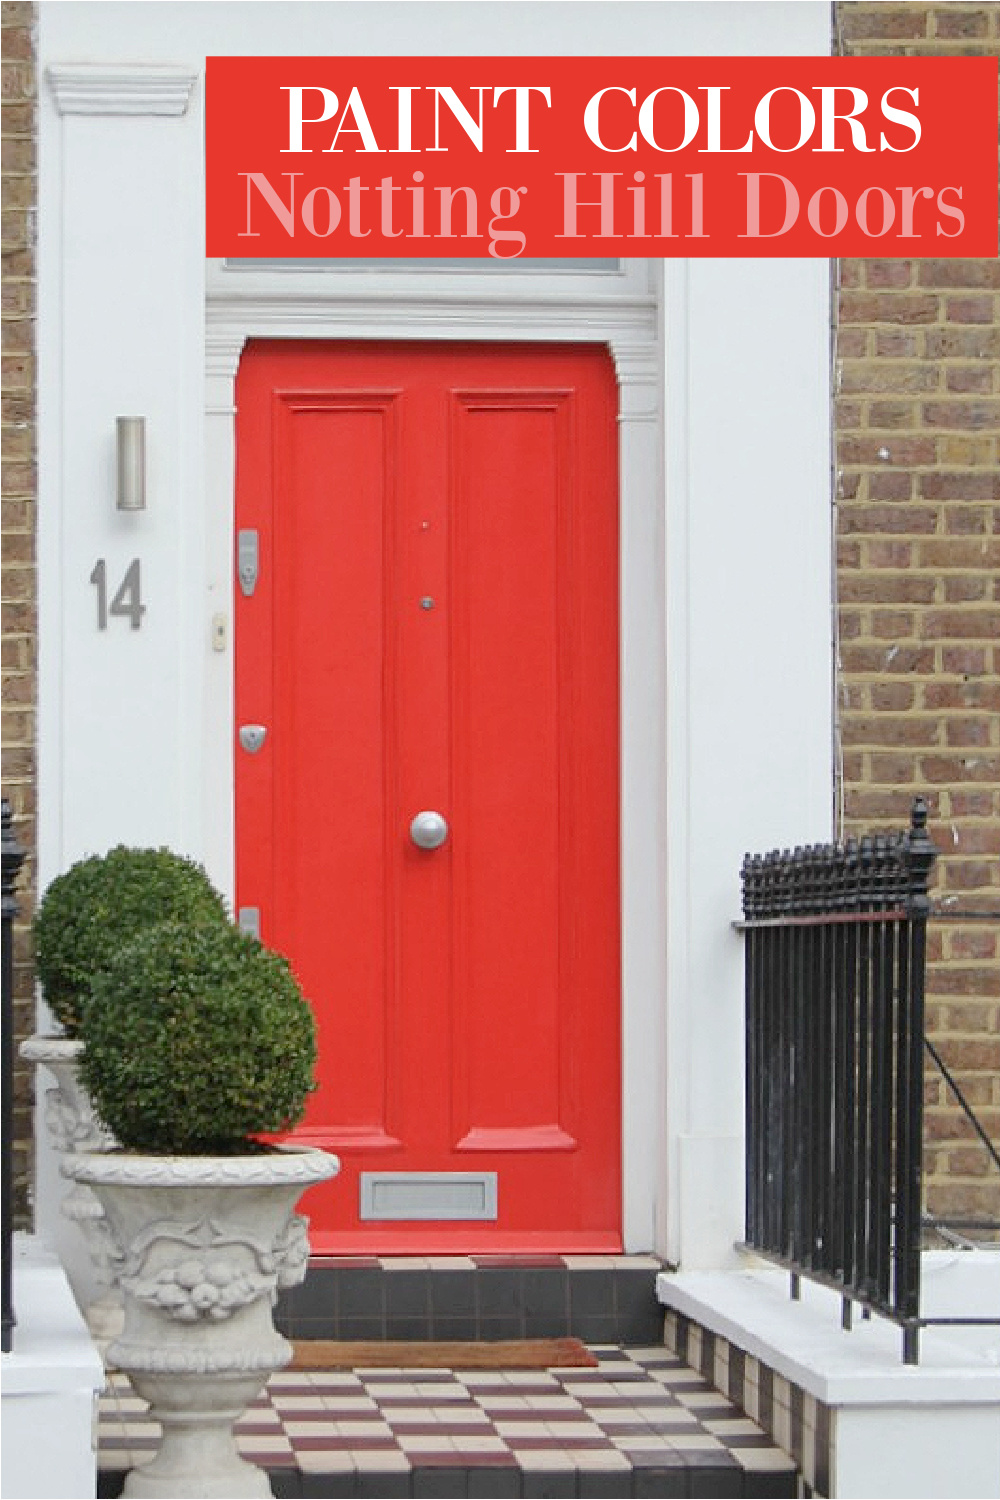 Paint colors for front doors in Notting Hill - on Hello Lovely Studio.